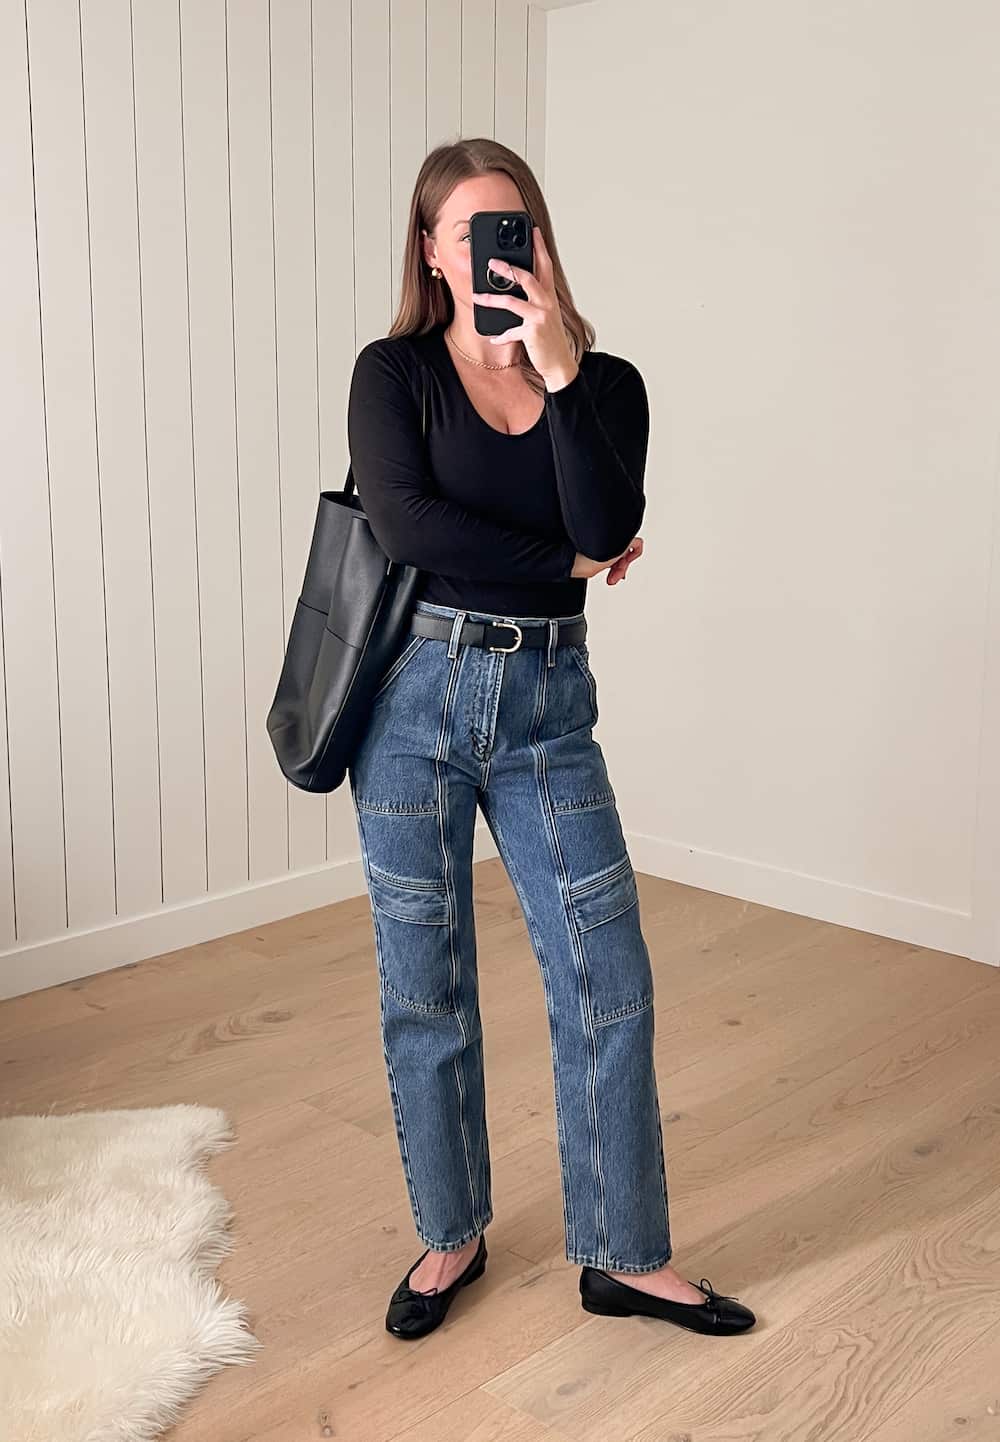 Christal wearing a black long-sleeved top with blue cargo jeans and black ballet flats and an Oak & Fort faux leather tote bag